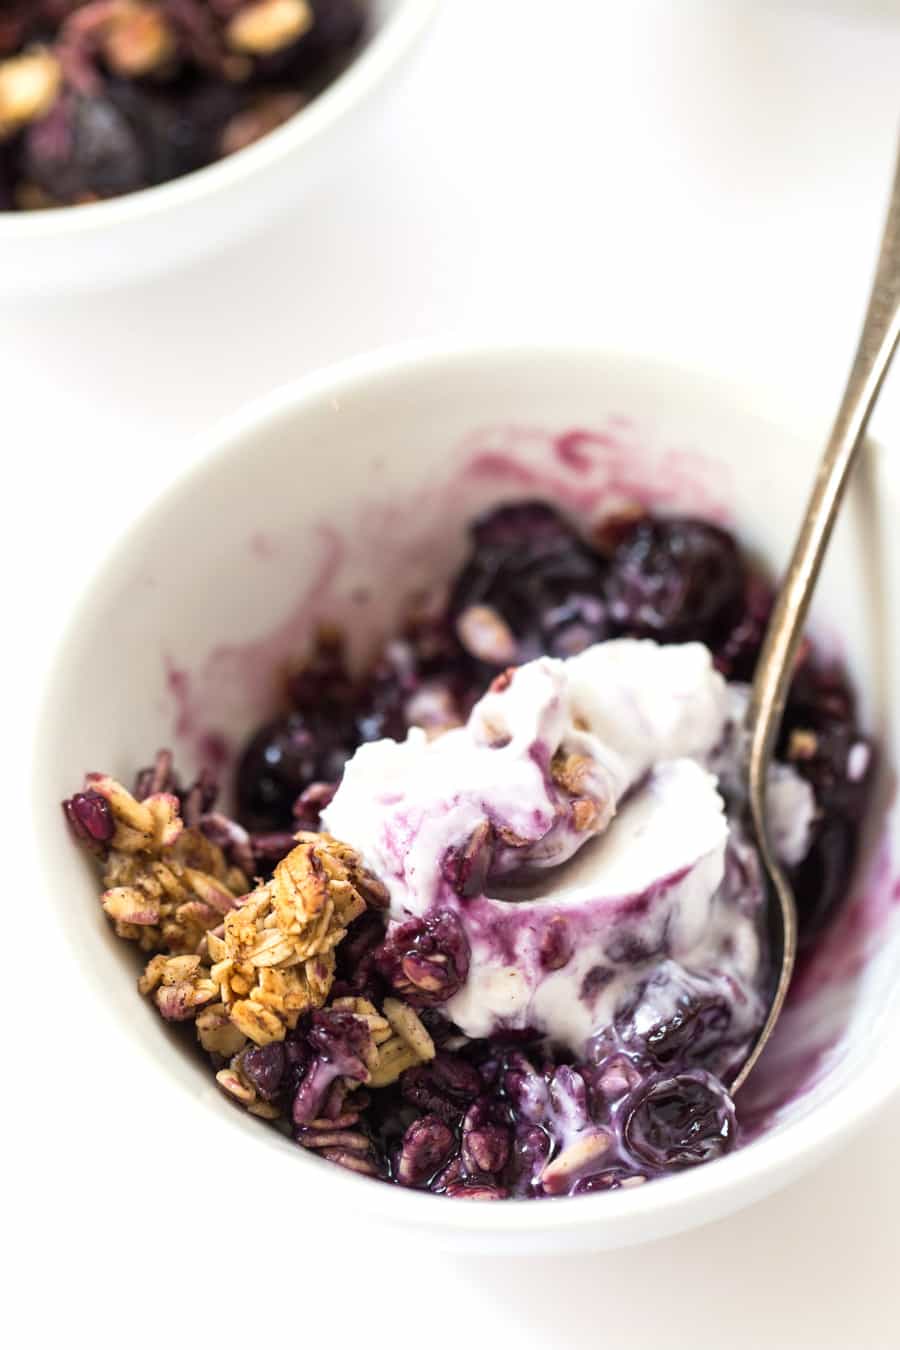 Banana Blueberry Crumble -- a healthy dessert that uses just 1/4 cup of sweetener, 9 ingredients and tastes AMAZING!